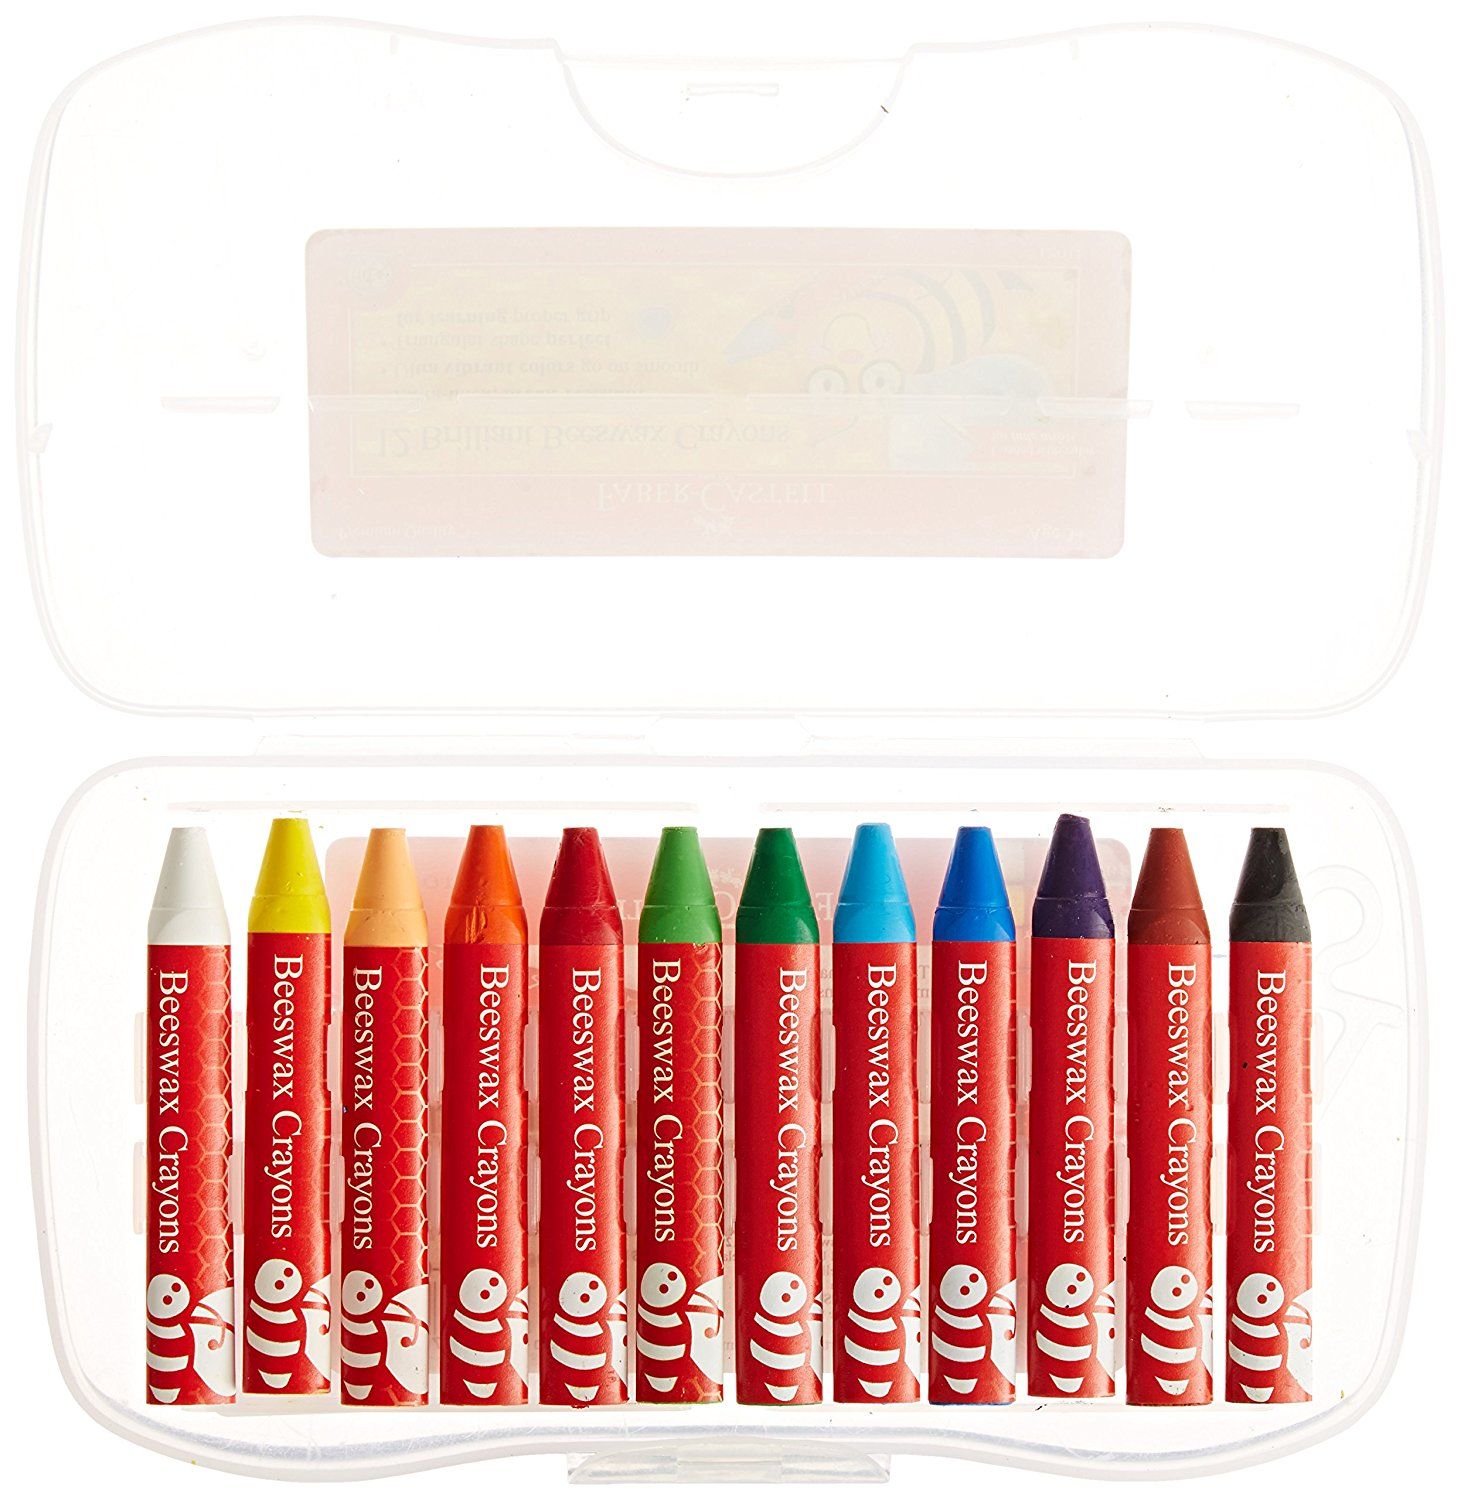 Brilliant Beeswax Crayon 12 Pack - Toys & Co. - Creativity For Kids